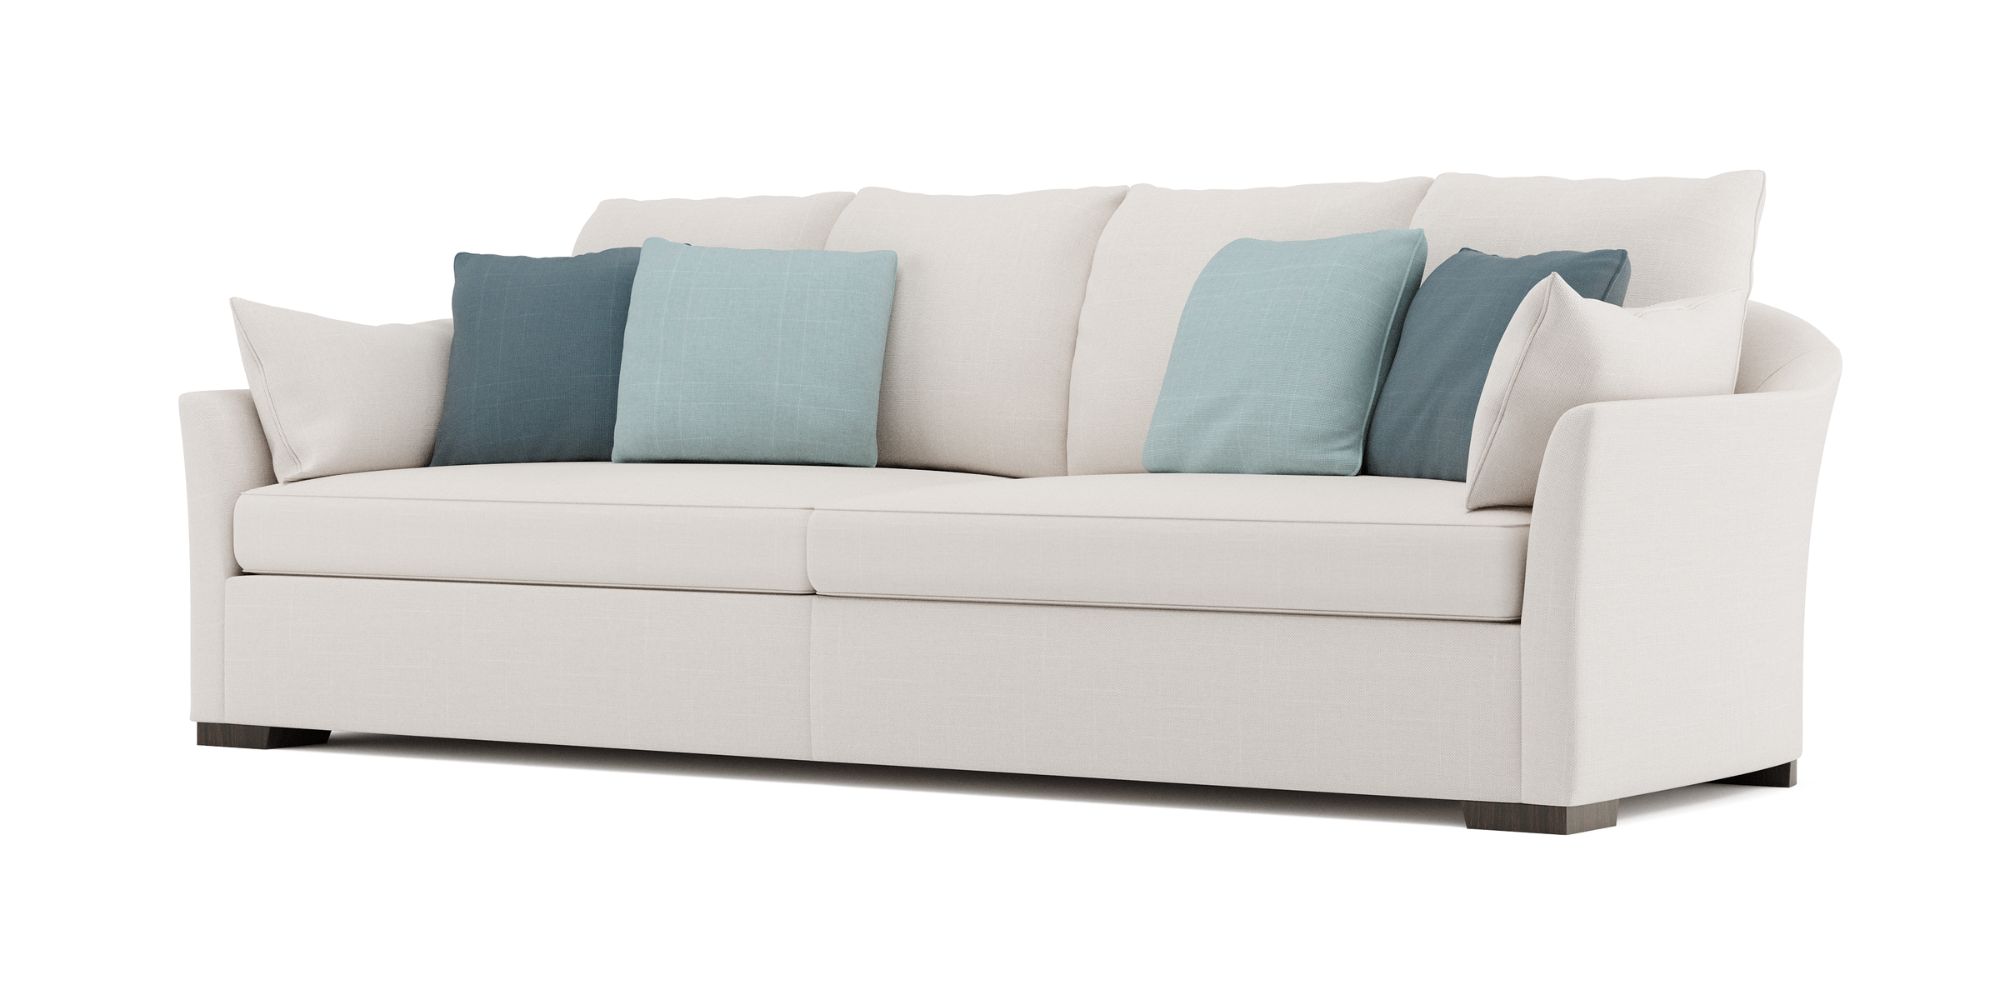 Largo Sofa – Cushion Back in Outdoor Sofas for Largo collection